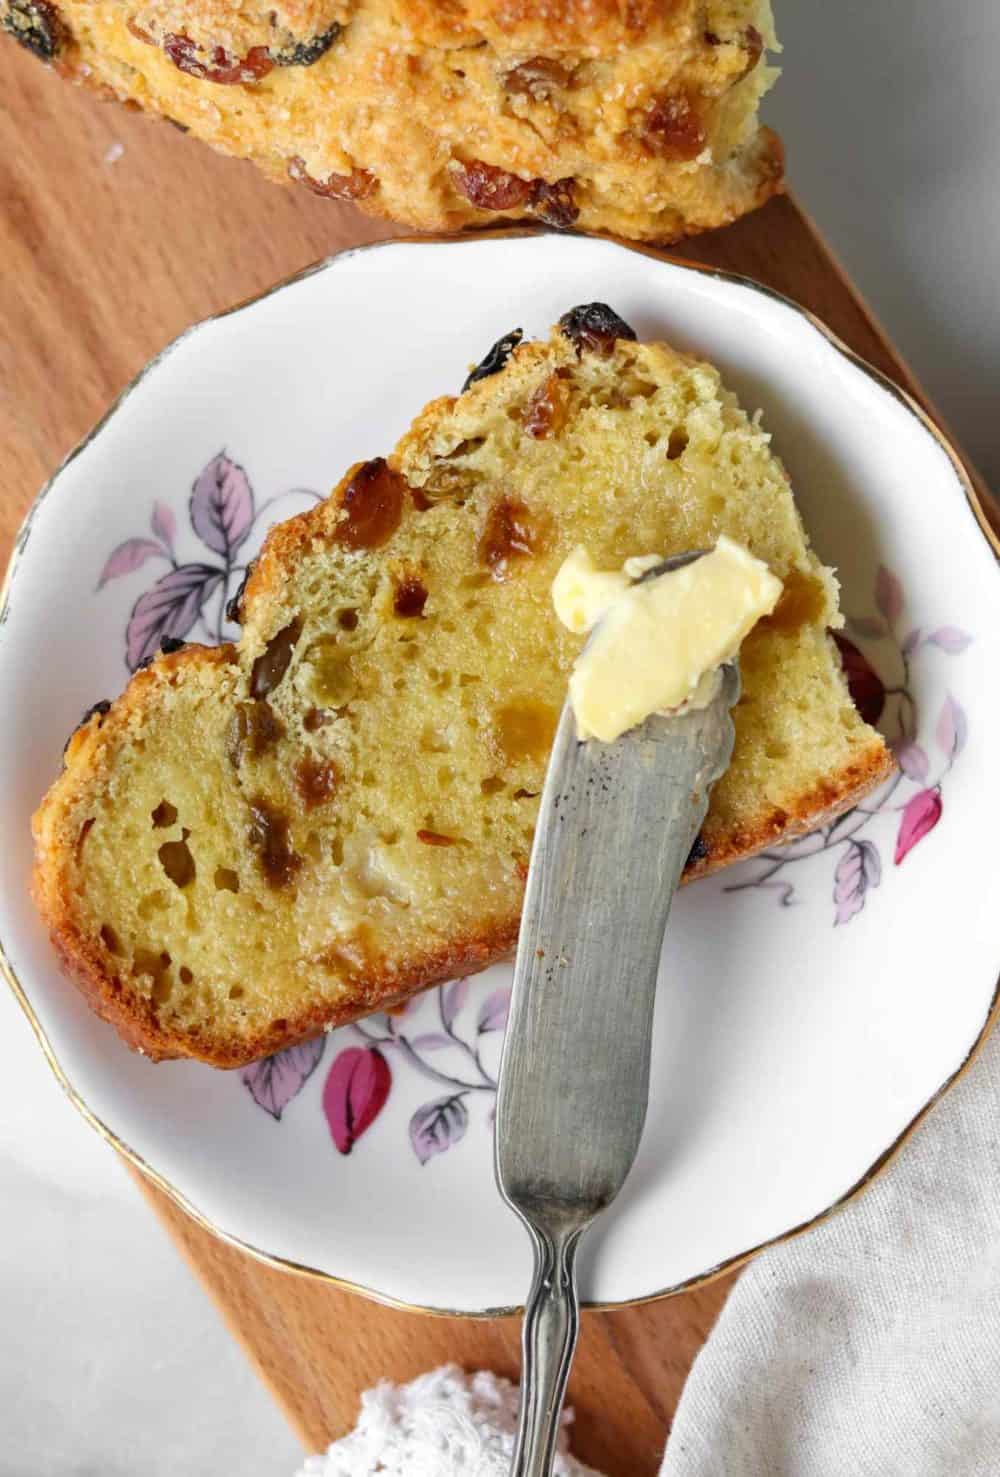 A warm slice of Irish soda bread, filled with whiskey-soaked raisins and glistening with salted Irish butter